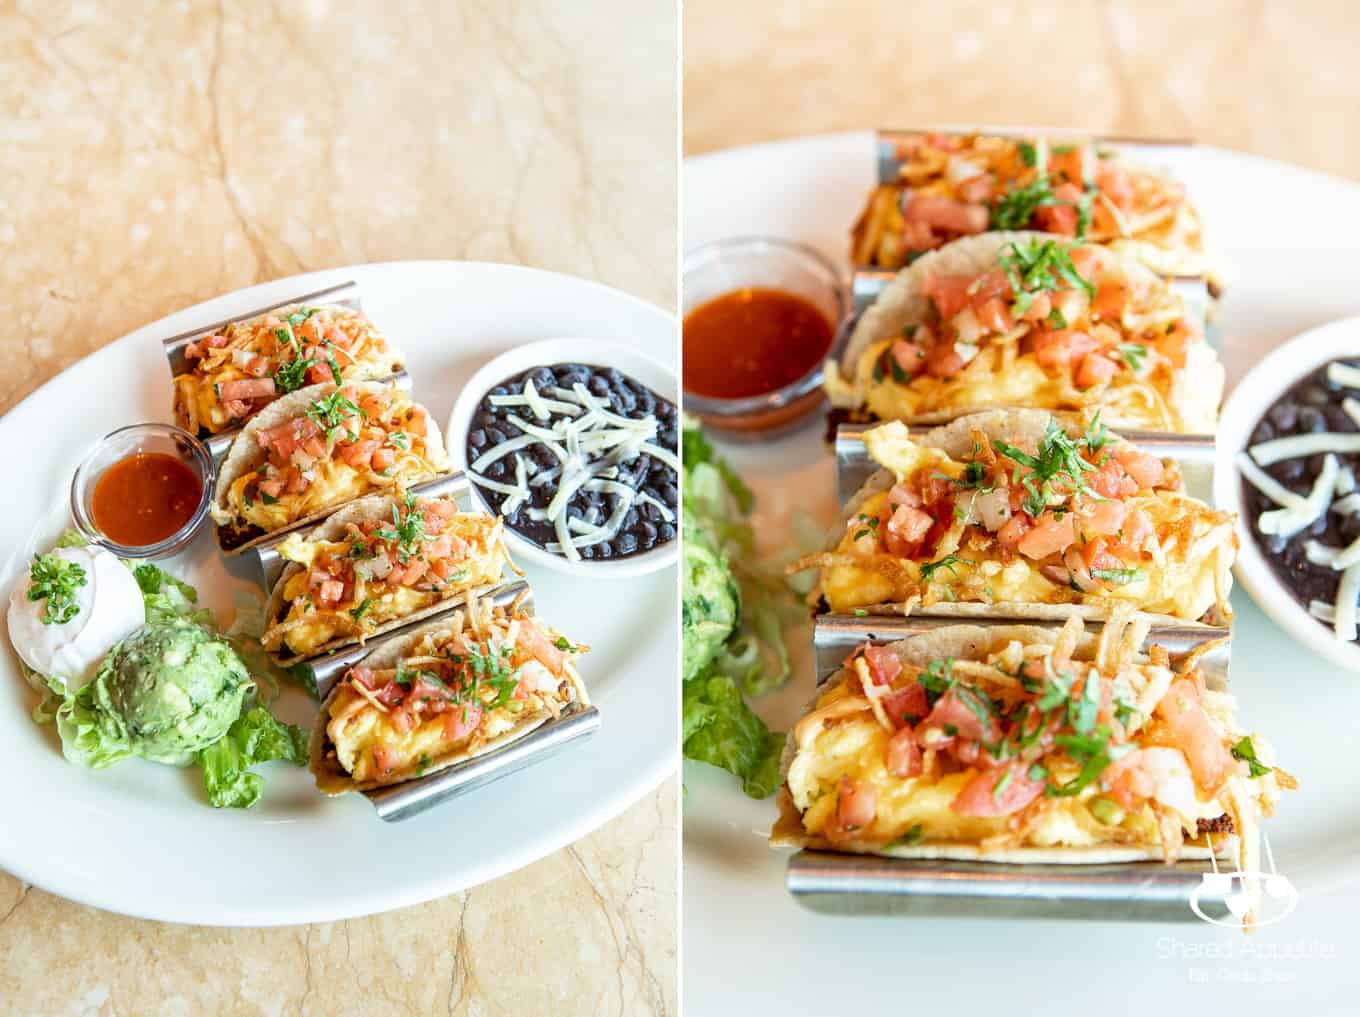 Breakfast Tacos at The Cheesecake Factory | sharedappetite.com